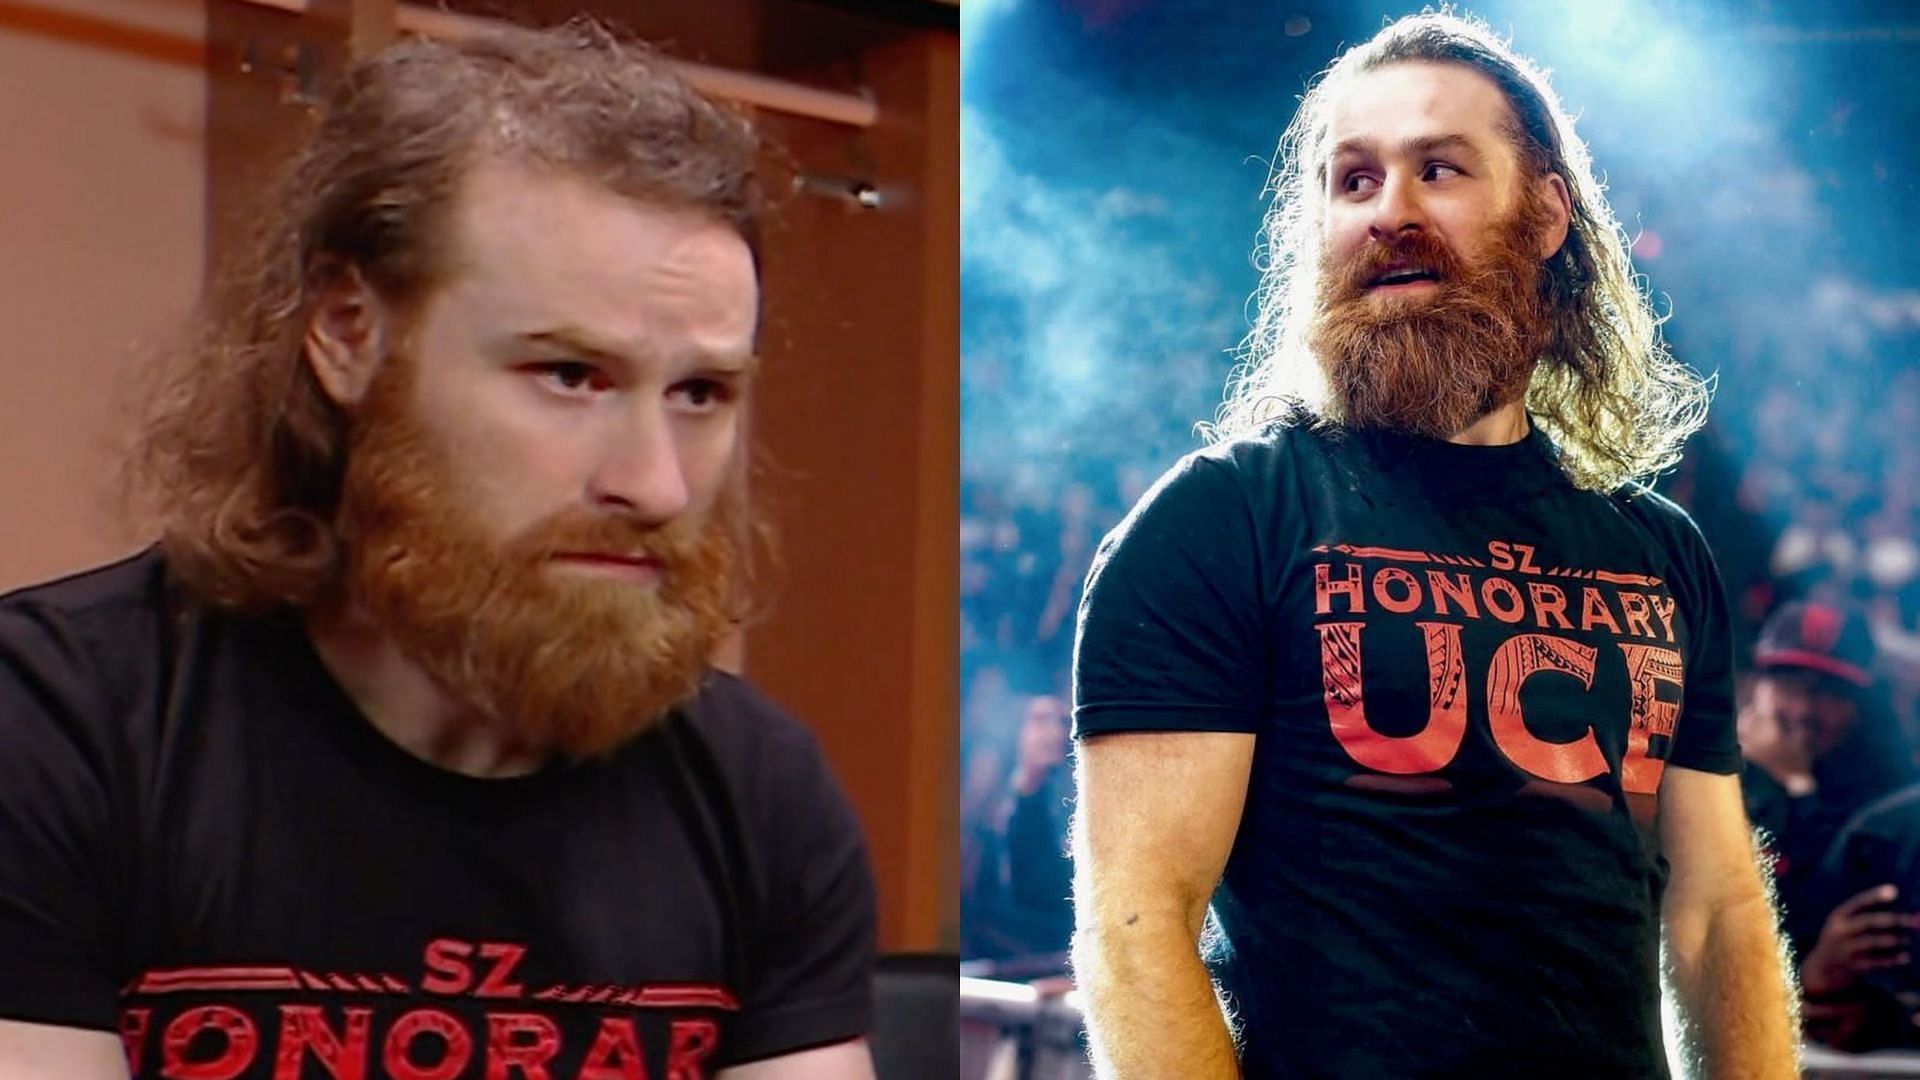 Sami Zayn is currently a member of The Bloodline in WWE